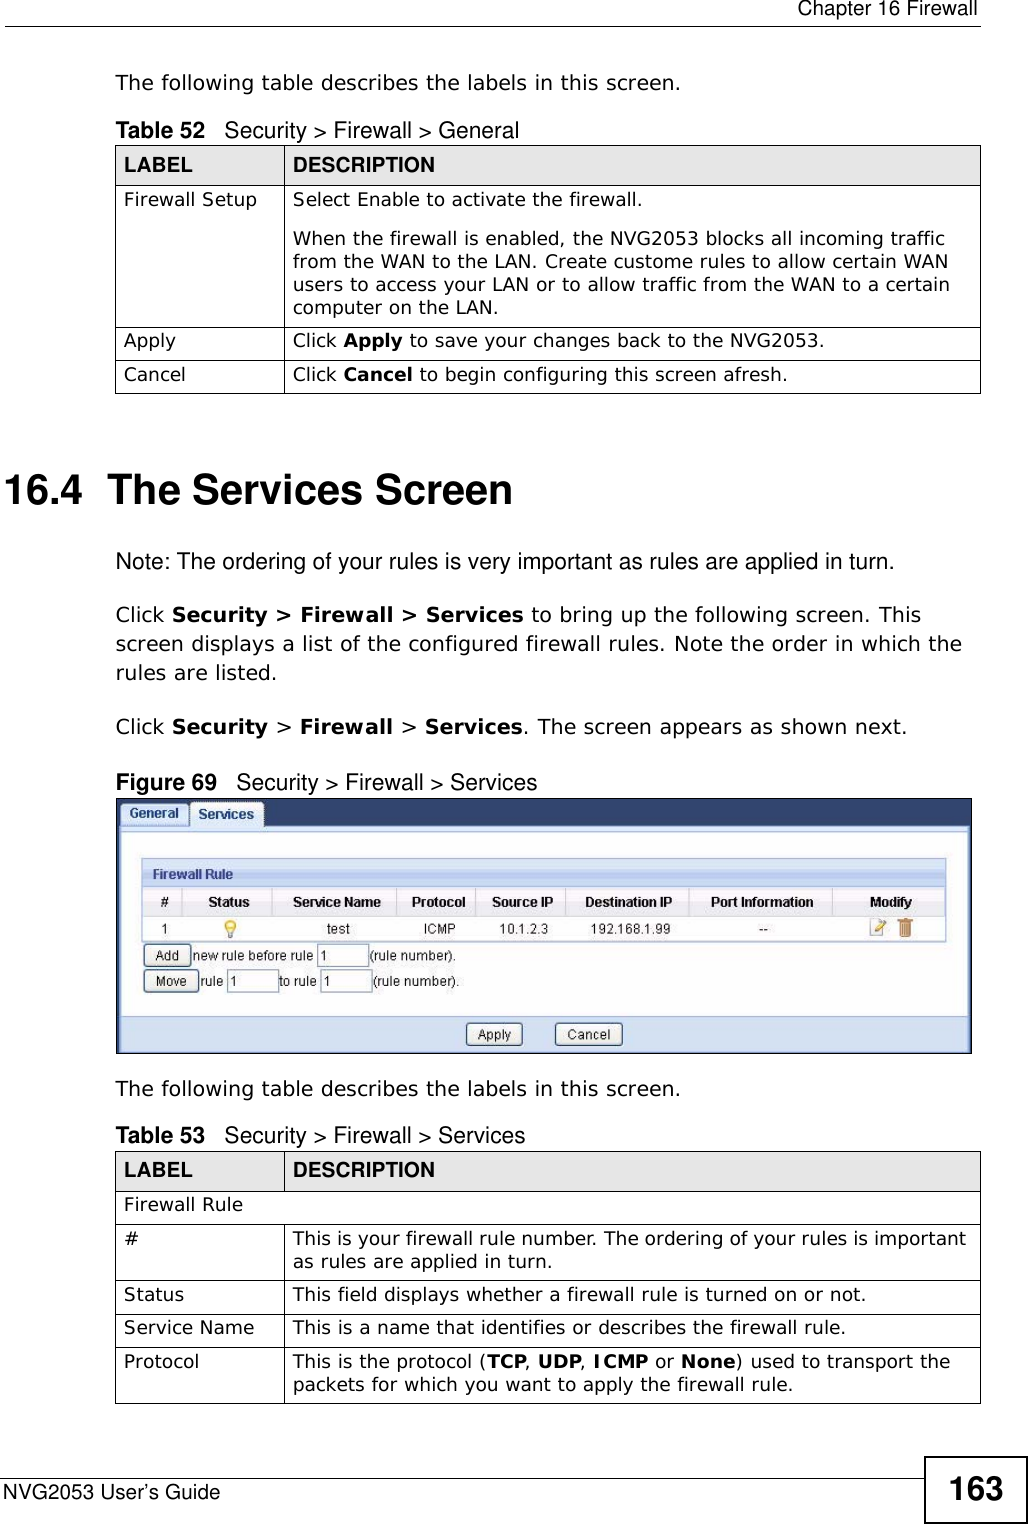  Chapter 16 FirewallNVG2053 User’s Guide 163The following table describes the labels in this screen.16.4  The Services Screen   Note: The ordering of your rules is very important as rules are applied in turn.Click Security &gt; Firewall &gt; Services to bring up the following screen. This screen displays a list of the configured firewall rules. Note the order in which the rules are listed.Click Security &gt; Firewall &gt; Services. The screen appears as shown next. Figure 69   Security &gt; Firewall &gt; Services The following table describes the labels in this screen.Table 52   Security &gt; Firewall &gt; General LABEL DESCRIPTIONFirewall Setup Select Enable to activate the firewall. When the firewall is enabled, the NVG2053 blocks all incoming traffic from the WAN to the LAN. Create custome rules to allow certain WAN users to access your LAN or to allow traffic from the WAN to a certain computer on the LAN.Apply Click Apply to save your changes back to the NVG2053.Cancel Click Cancel to begin configuring this screen afresh.Table 53   Security &gt; Firewall &gt; ServicesLABEL DESCRIPTIONFirewall Rule#This is your firewall rule number. The ordering of your rules is important as rules are applied in turn. Status This field displays whether a firewall rule is turned on or not. Service Name This is a name that identifies or describes the firewall rule.Protocol This is the protocol (TCP, UDP, ICMP or None) used to transport the packets for which you want to apply the firewall rule. 